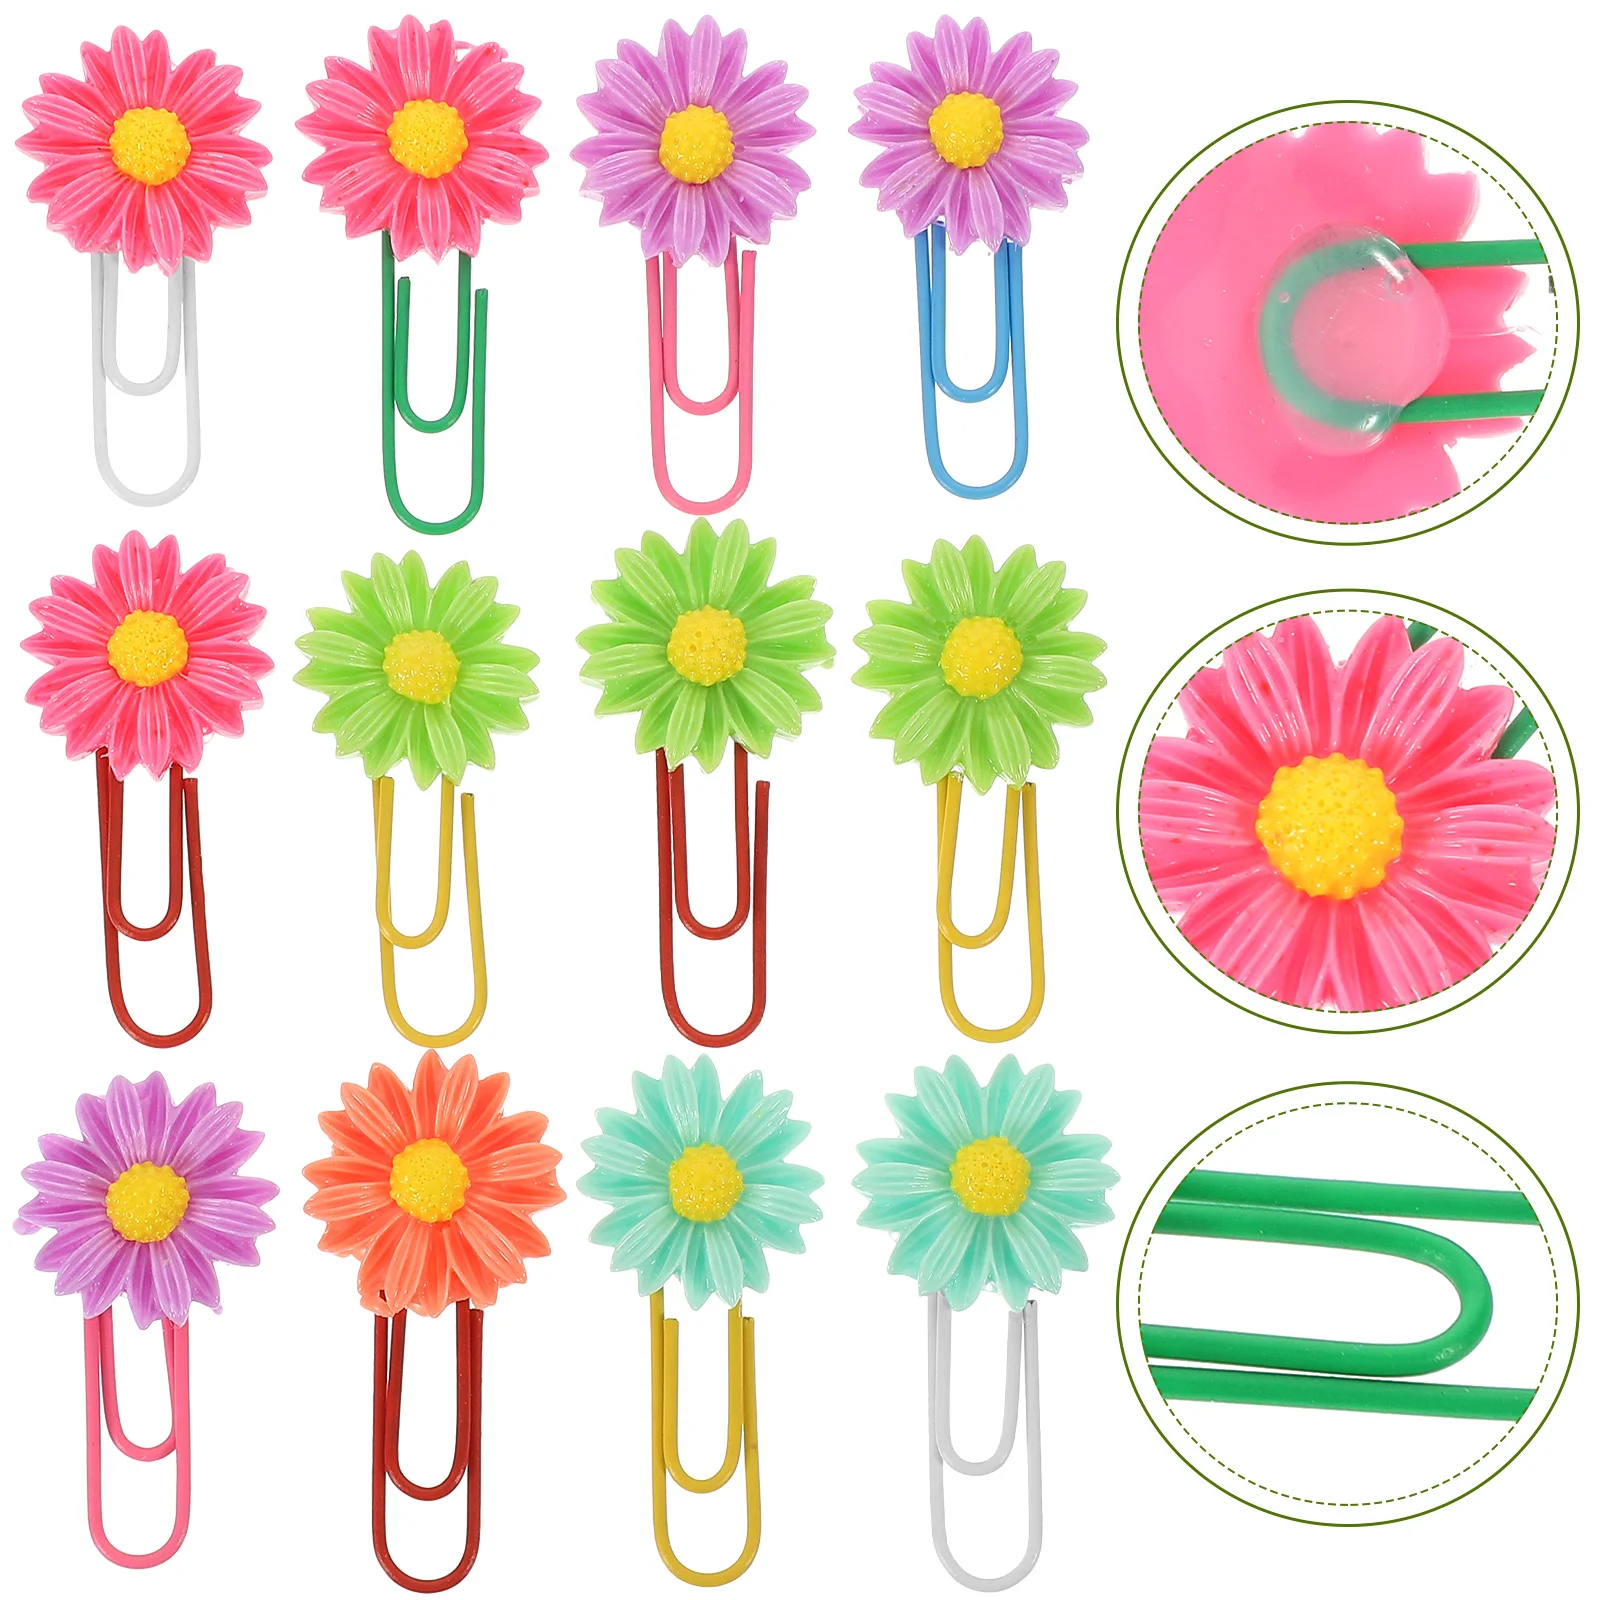 

Stobok Flower Paperclips Creative File Clip Vintage Paper Clip Decorative File Clips Colored Paper Clips Bookmark Marking